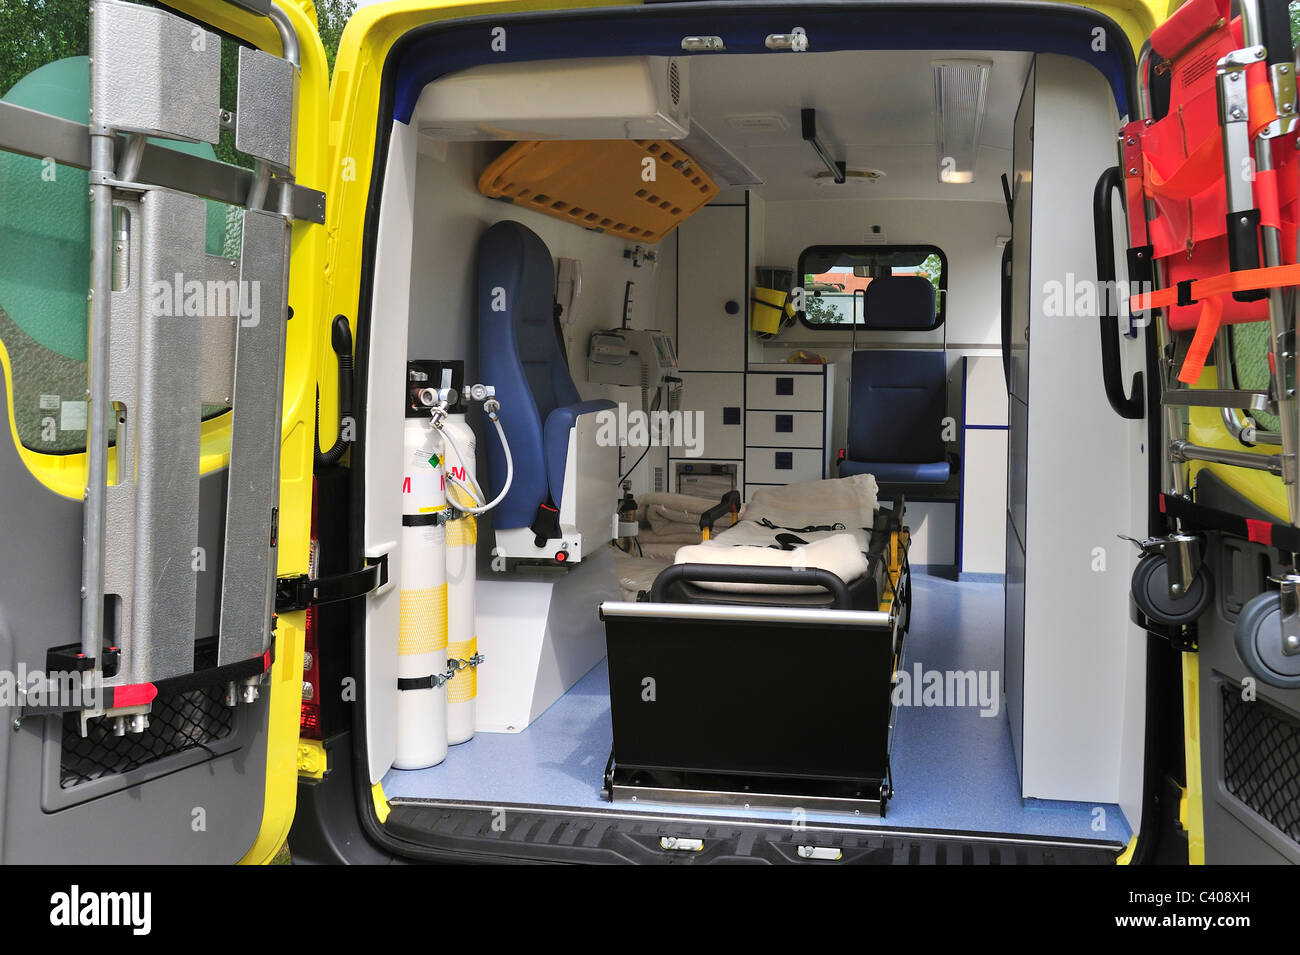 Interior Of Military Ambulance Of The Belgian Medical